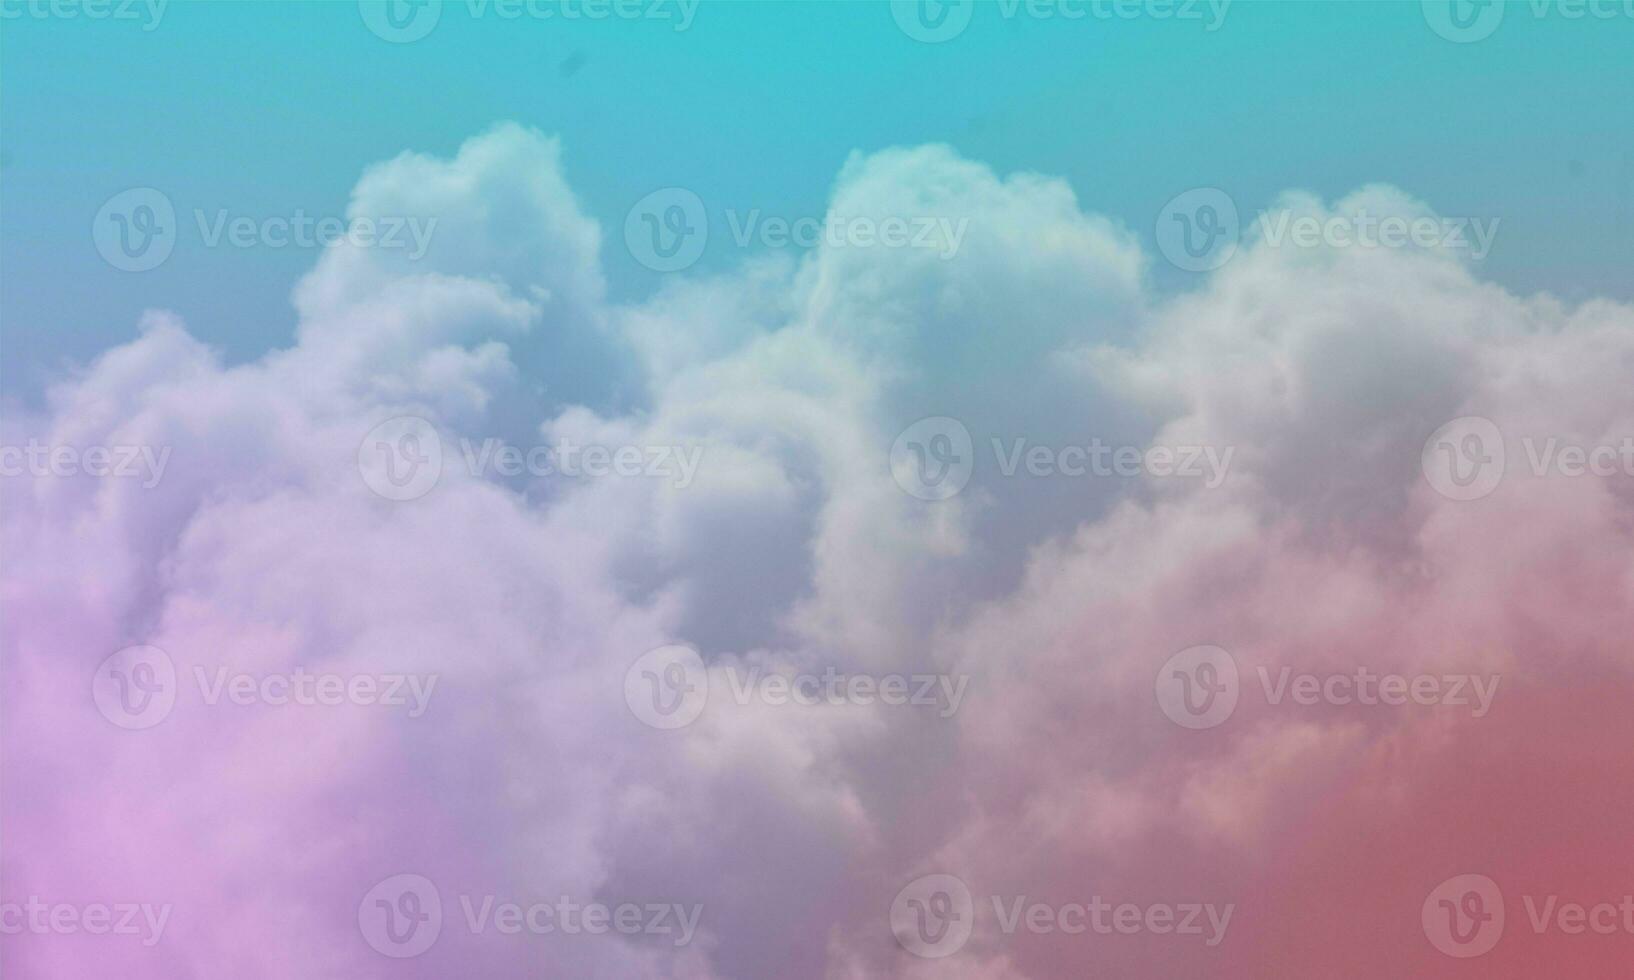 sky background with pastel gradients photo